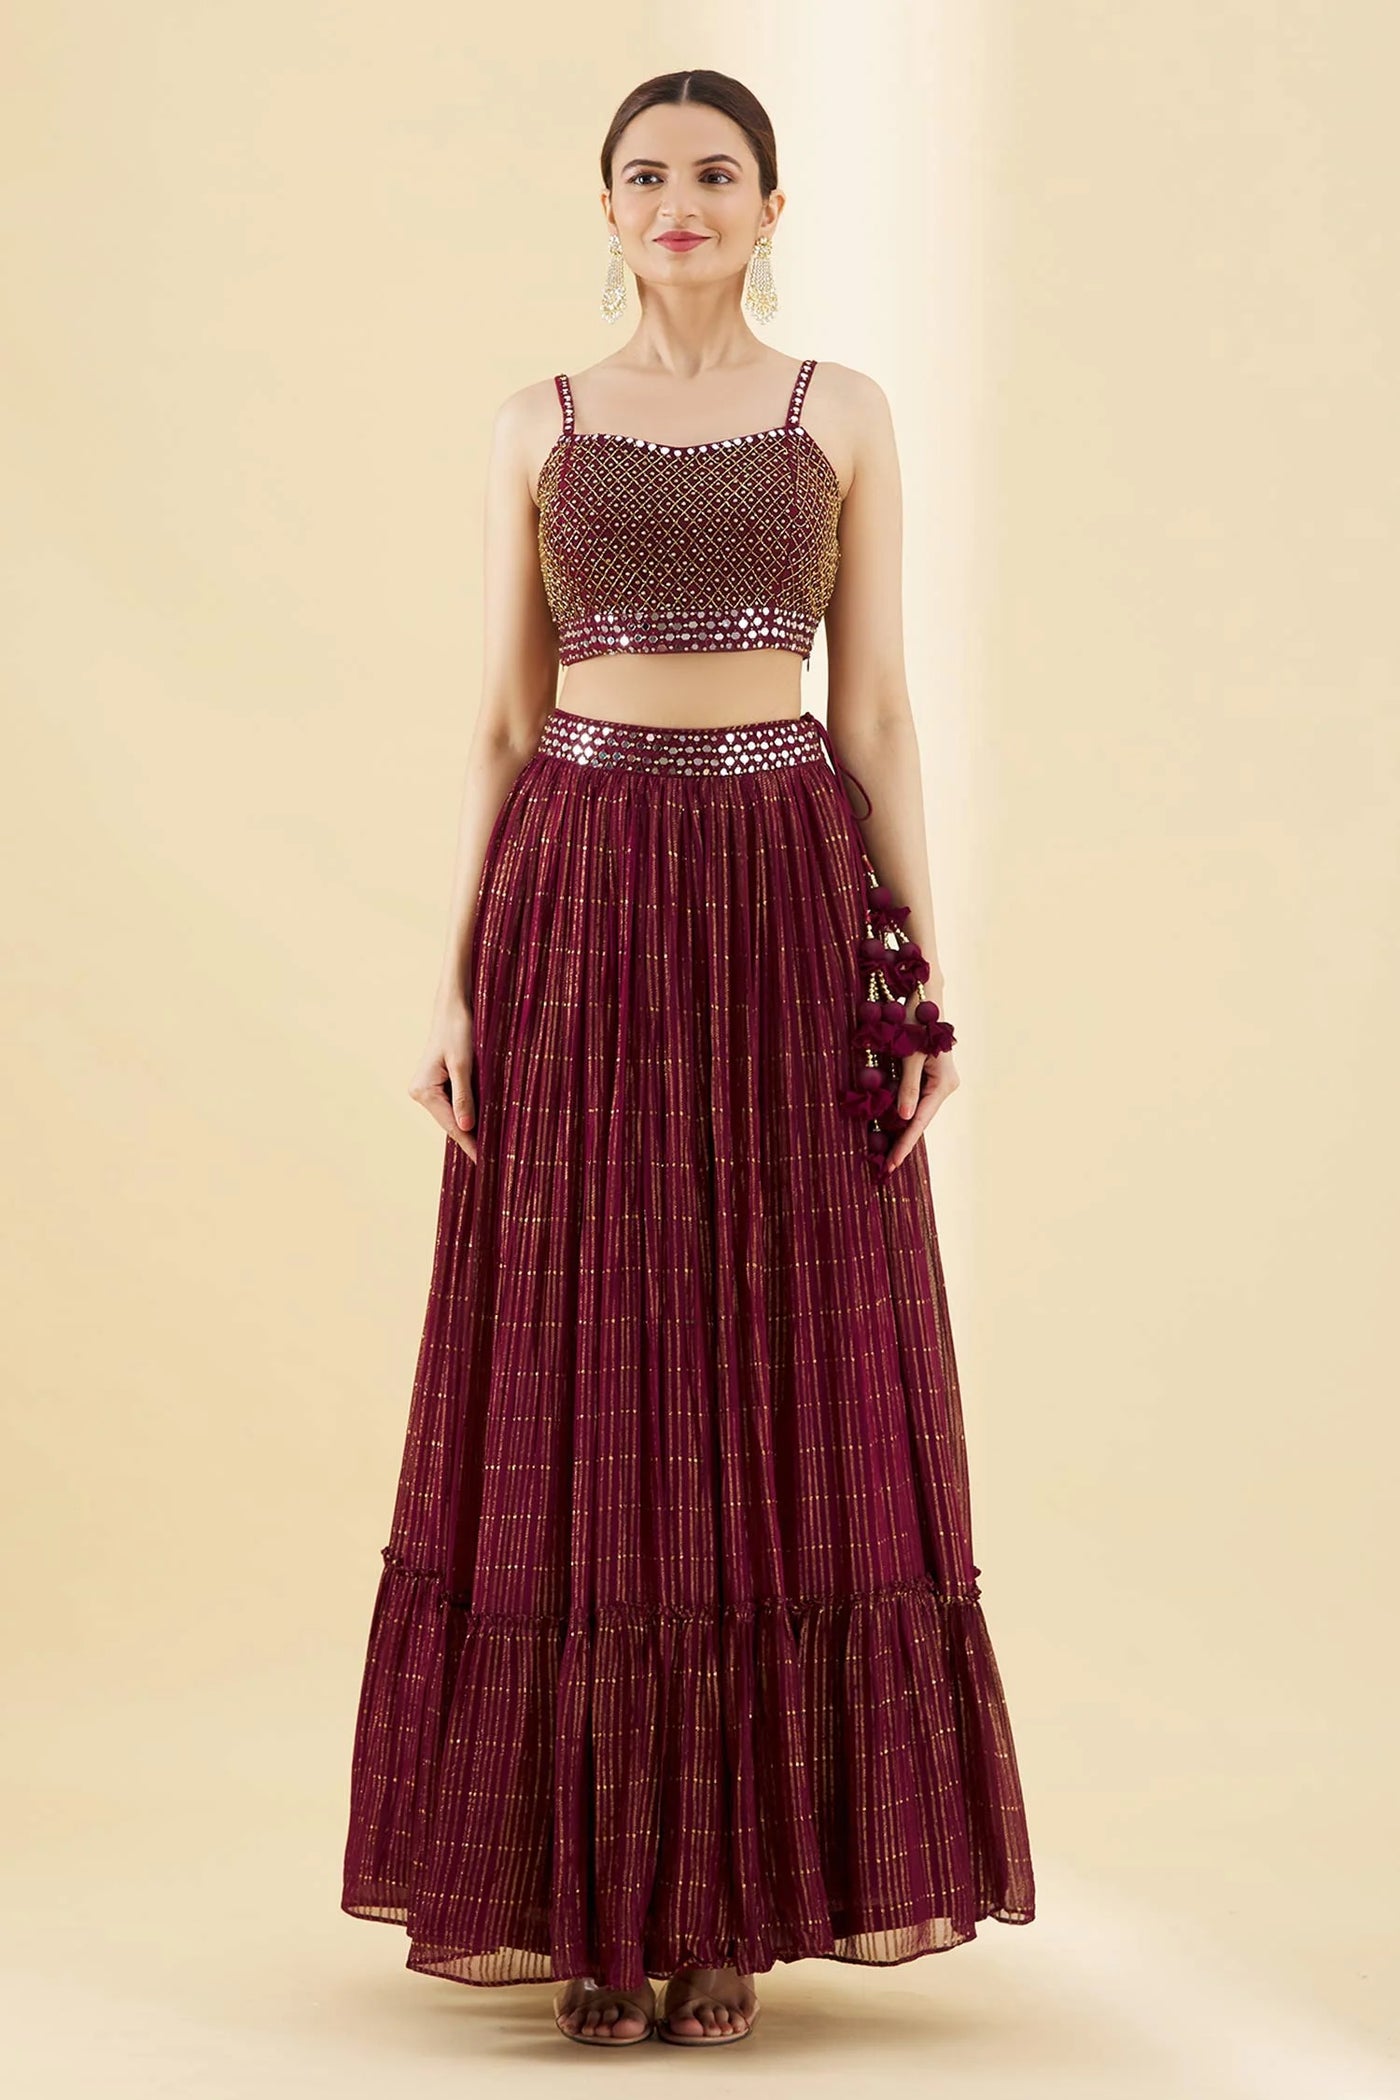 Purple Net Georgette Lehenga Indian Clothing in Denver, CO, Aurora, CO, Boulder, CO, Fort Collins, CO, Colorado Springs, CO, Parker, CO, Highlands Ranch, CO, Cherry Creek, CO, Centennial, CO, and Longmont, CO. NATIONWIDE SHIPPING USA- India Fashion X